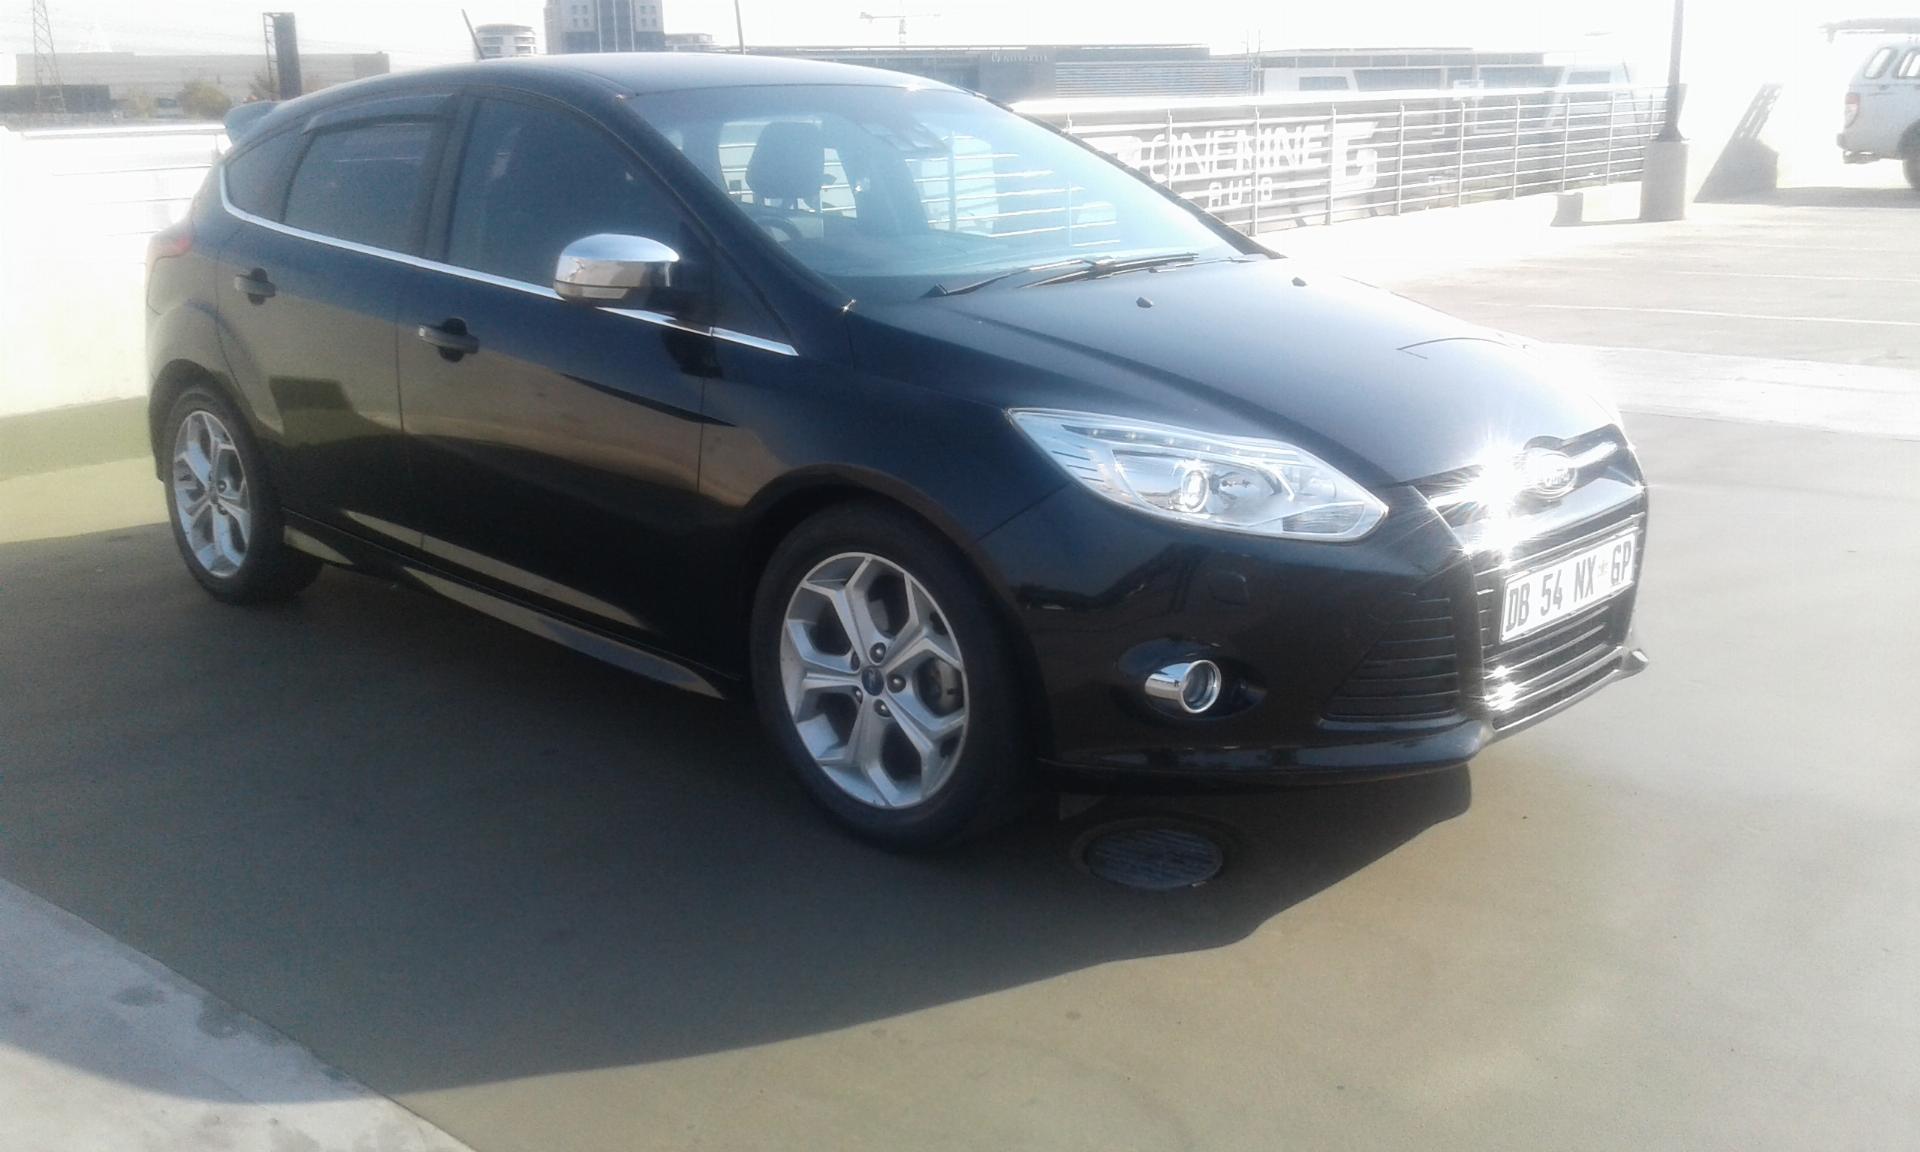 Ford Focus 2.0 Gdi Sport S3